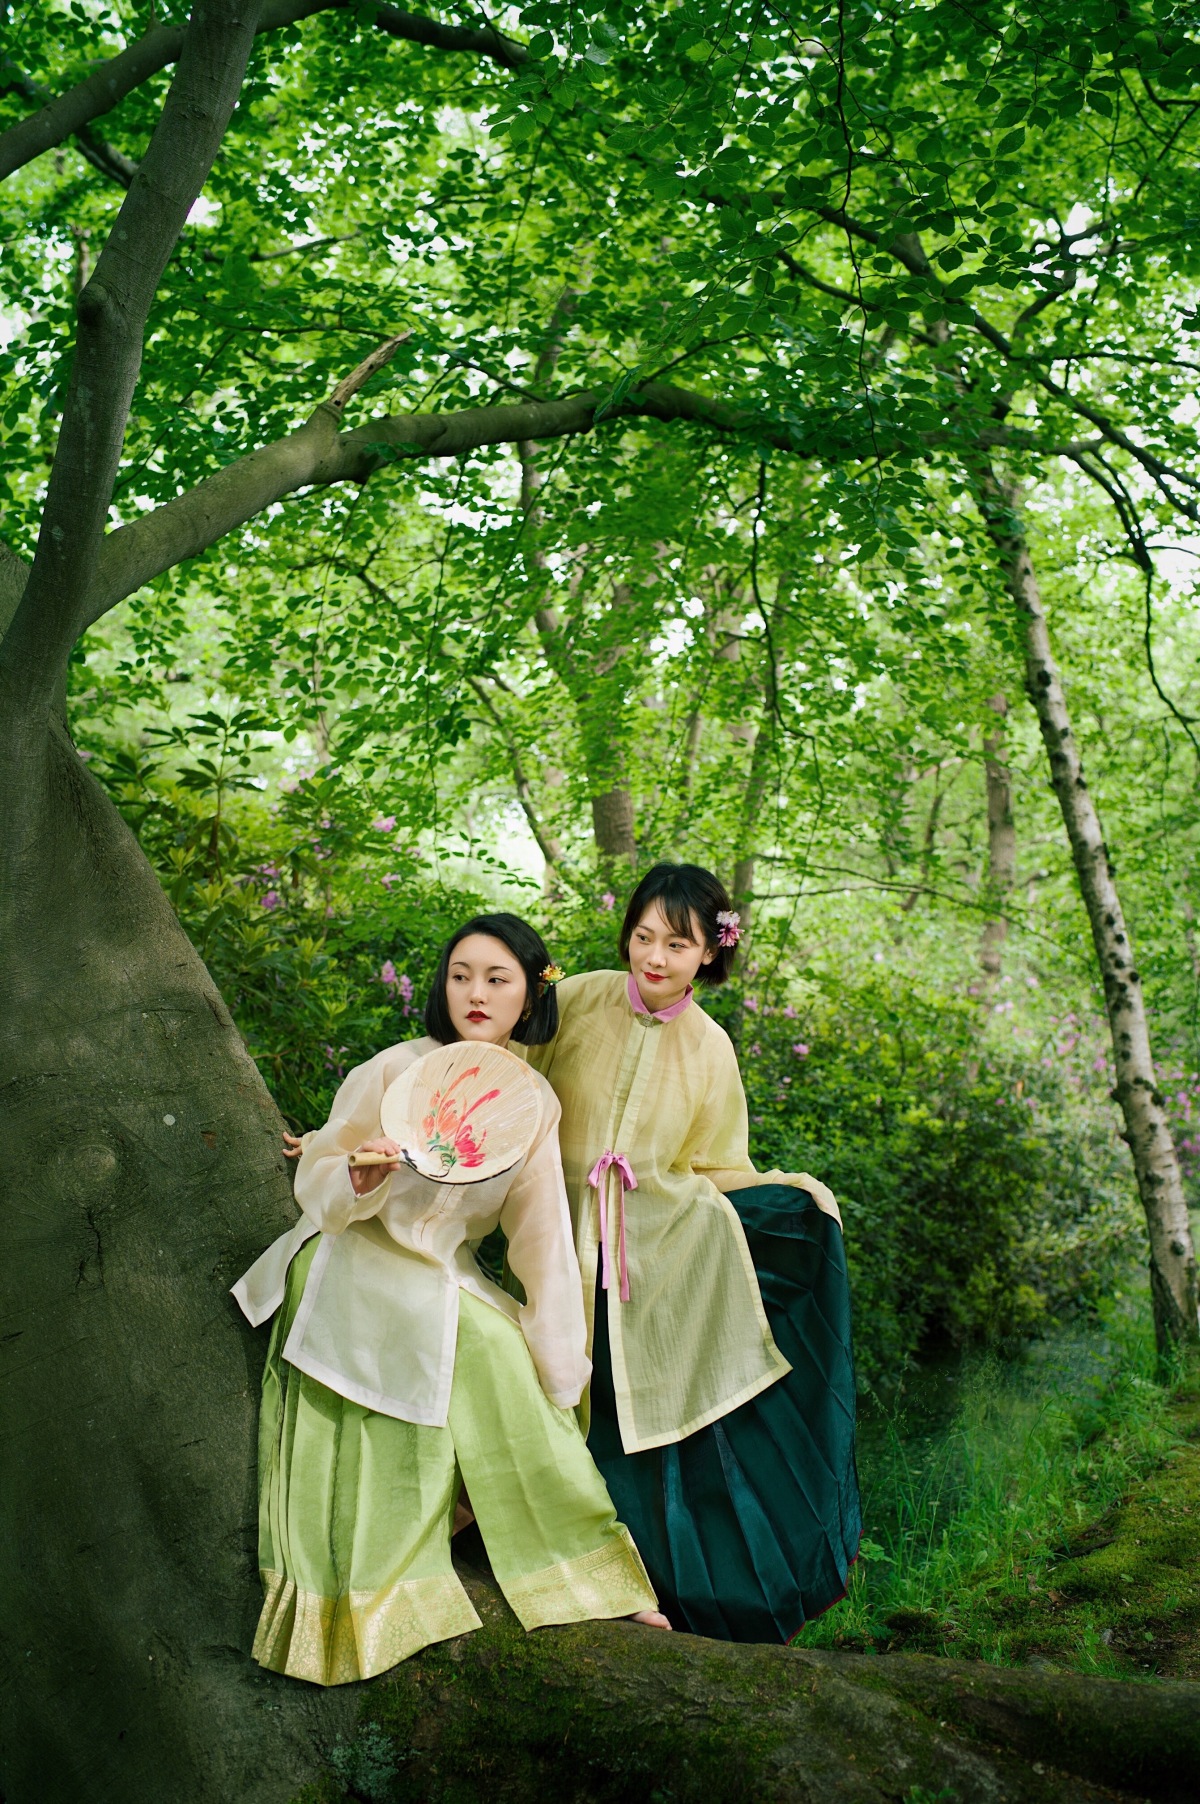 Liu Liang and her friend dressed her own-designed Hanfu in Den Haag \Photo prpvided to Liu Liang